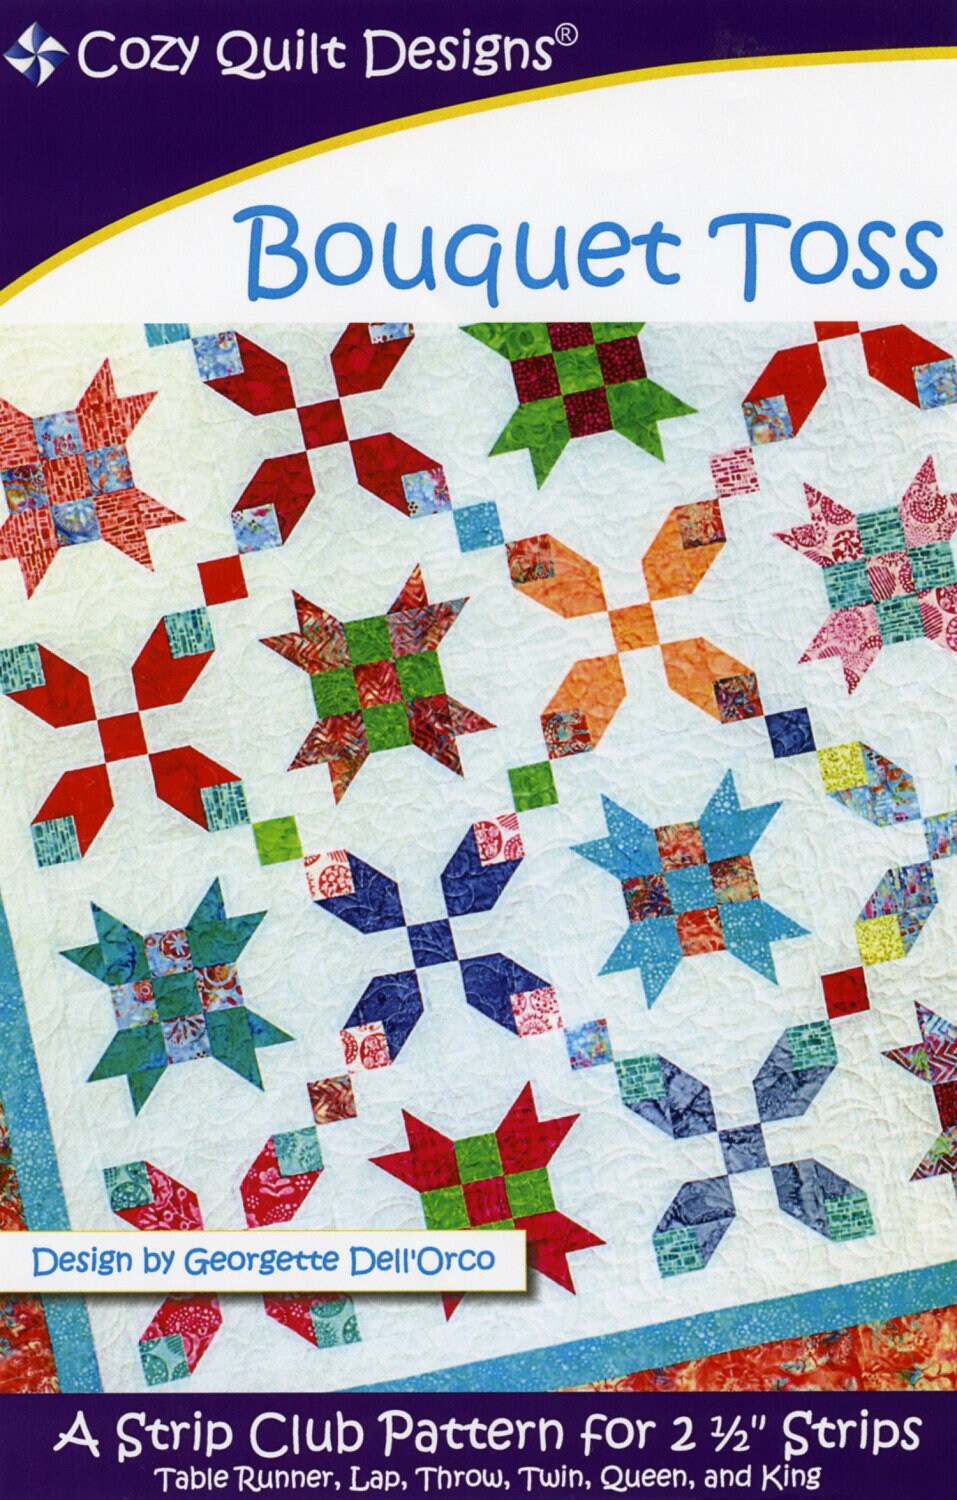 Bouquet Toss Quilt Pattern - Cozy Quilt Designs - Georgette Dell’Orco - Jelly Roll Friendly